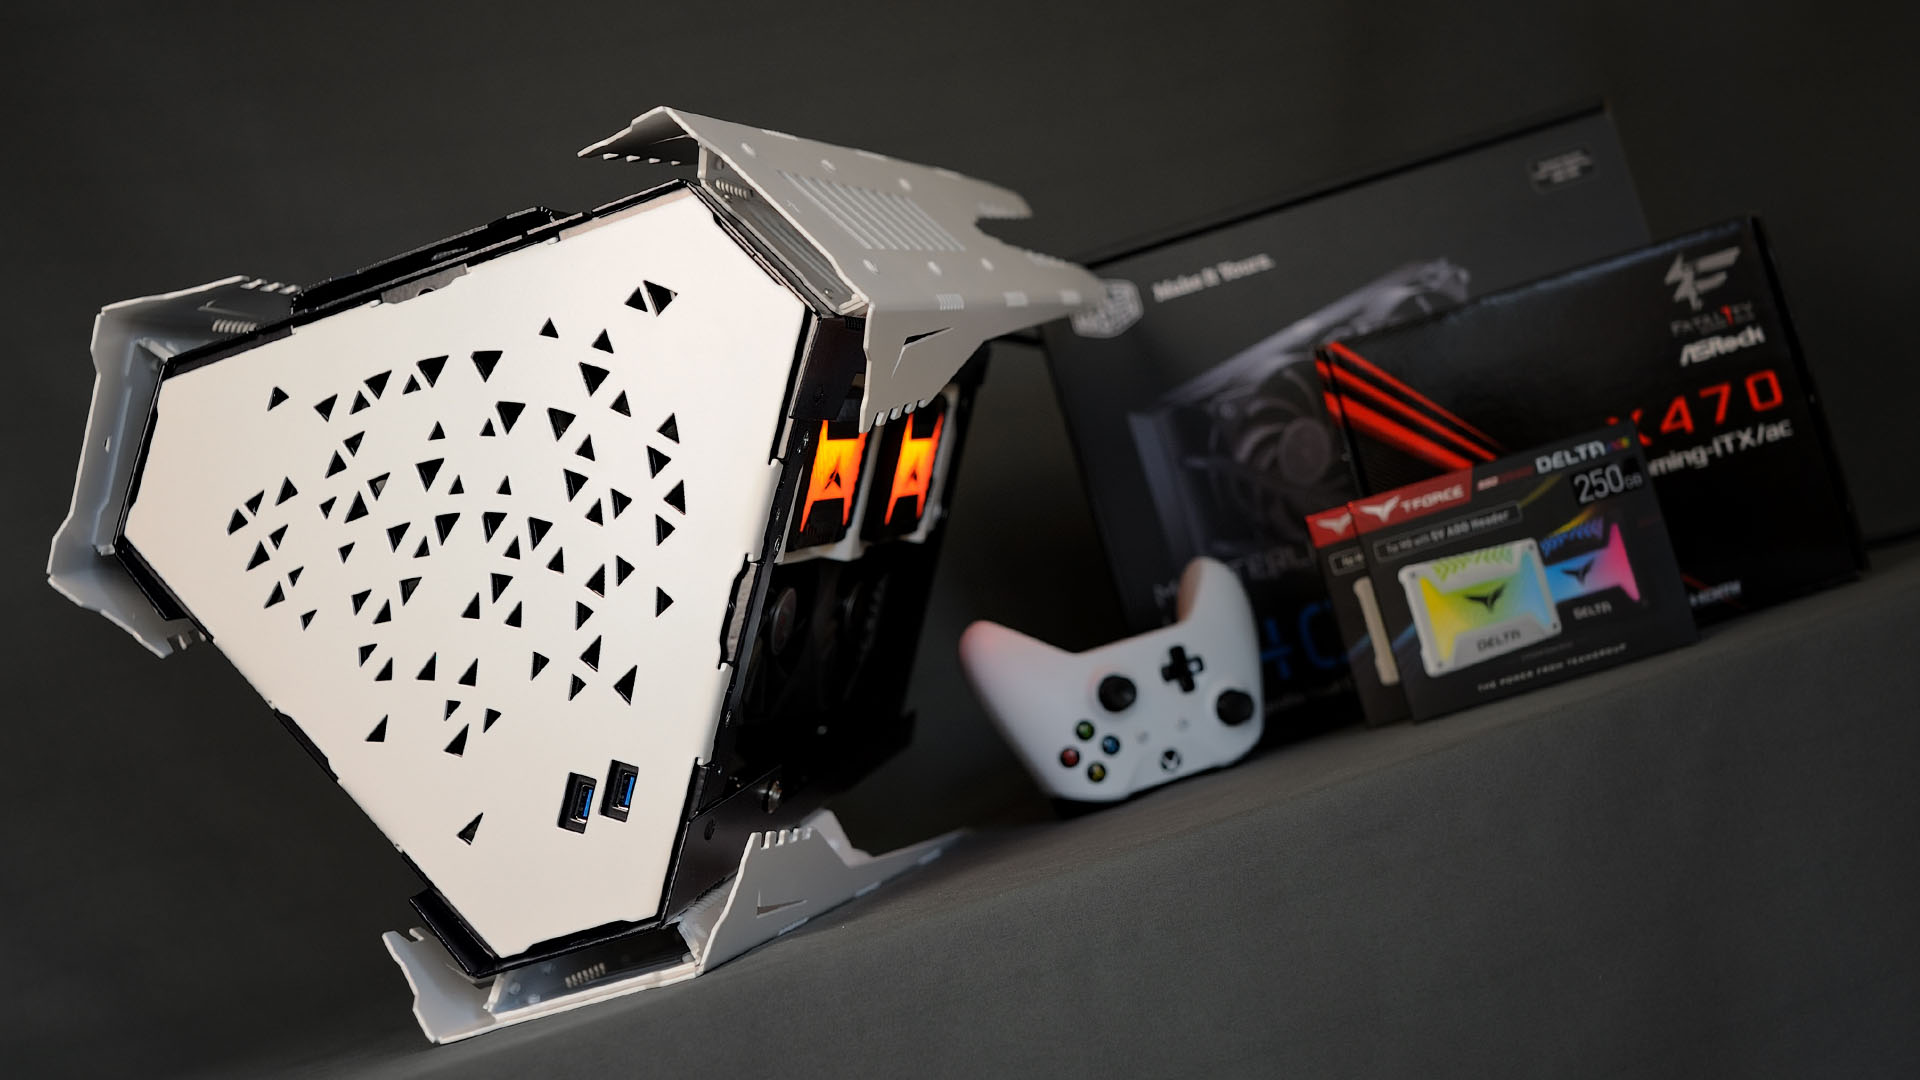 This space age gaming PC build is inspired by the Sputnik satellite